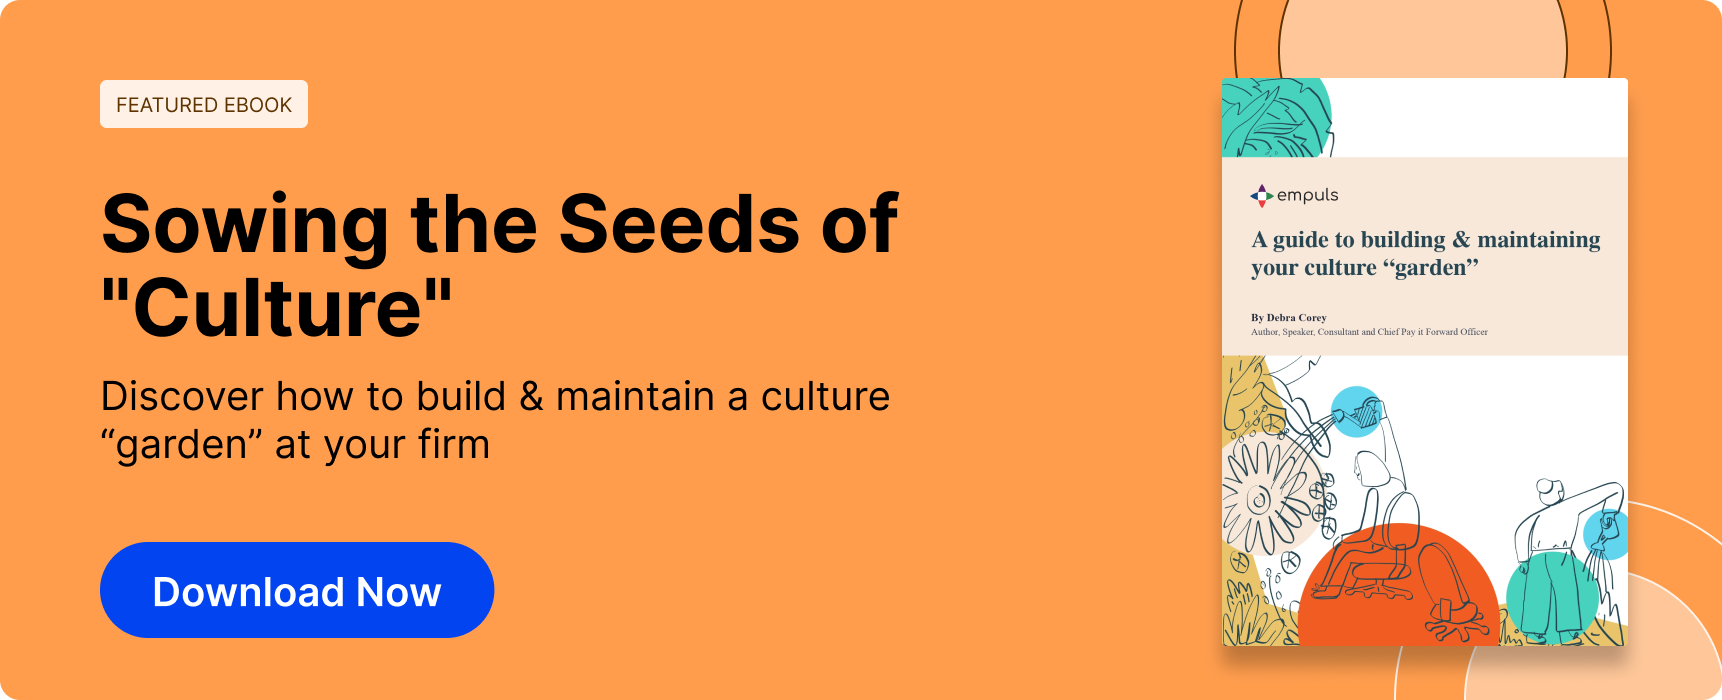 Free guide to building and maintaining the culture garden